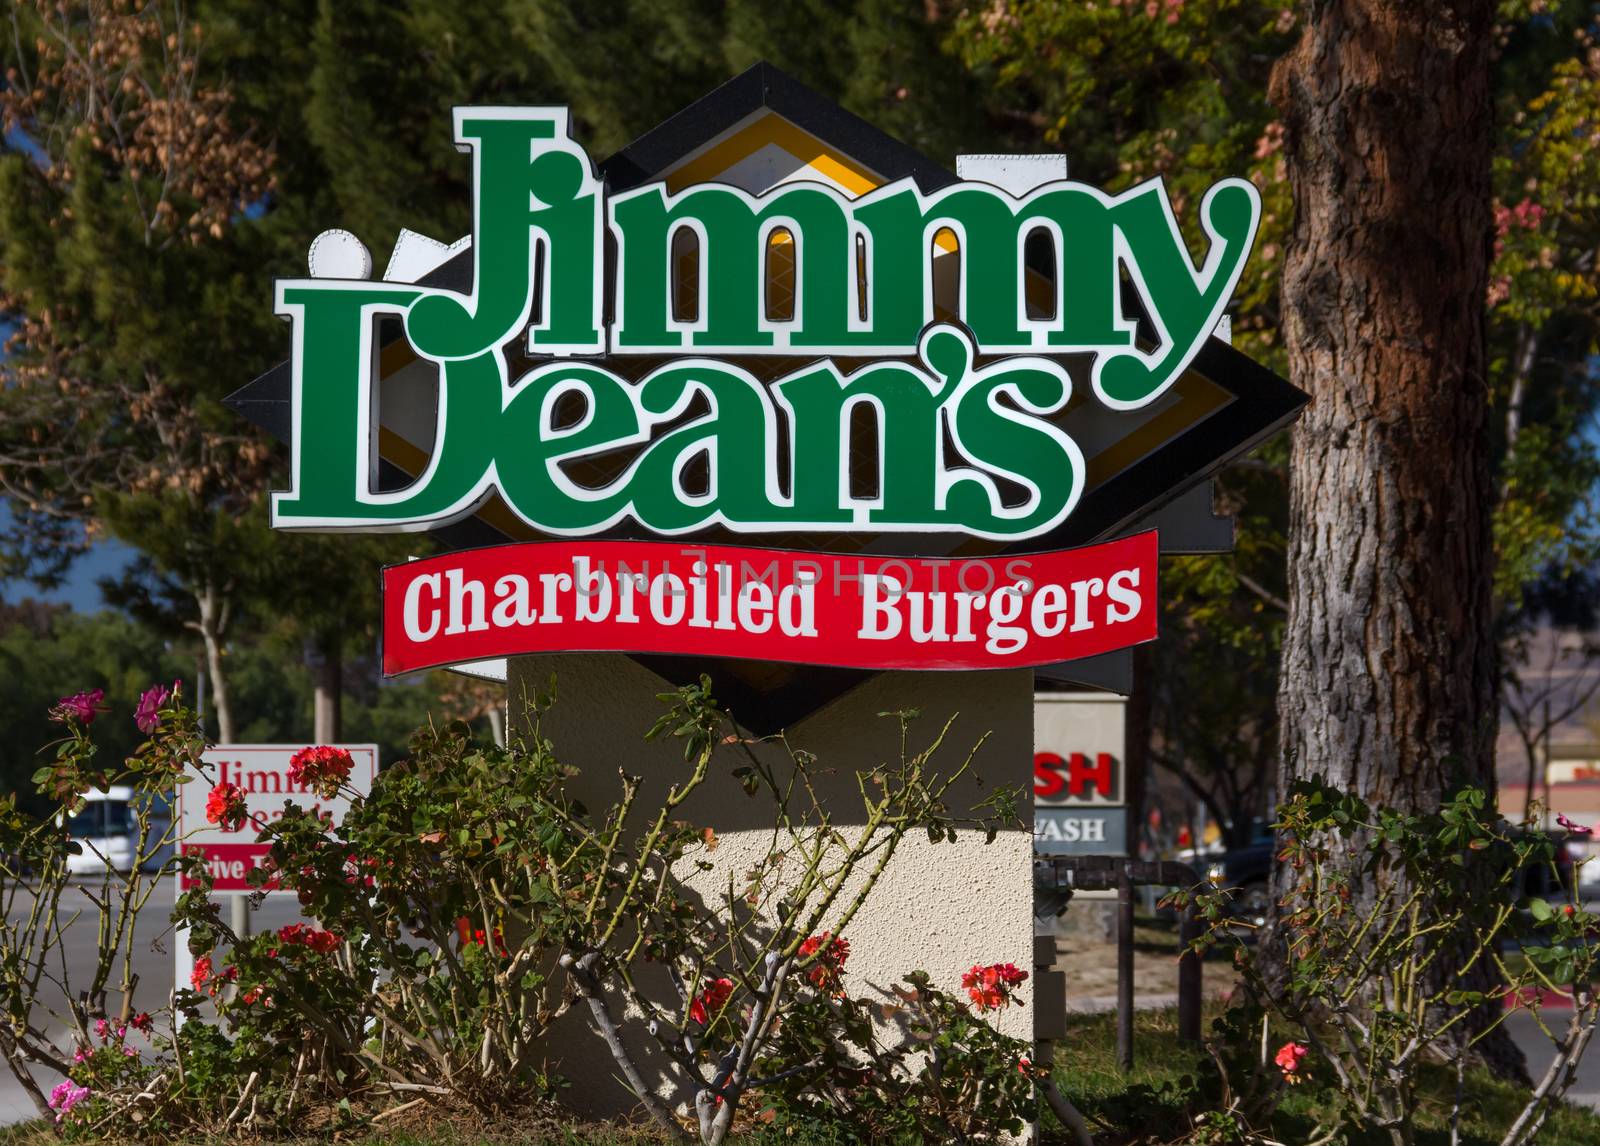 VALENCIA CA/USA - DECEMBER 26, 2015: Jimmy Dean's Charbroiled Burgers exterior and logo. Jimmy Dean's is a chain of restaurants.